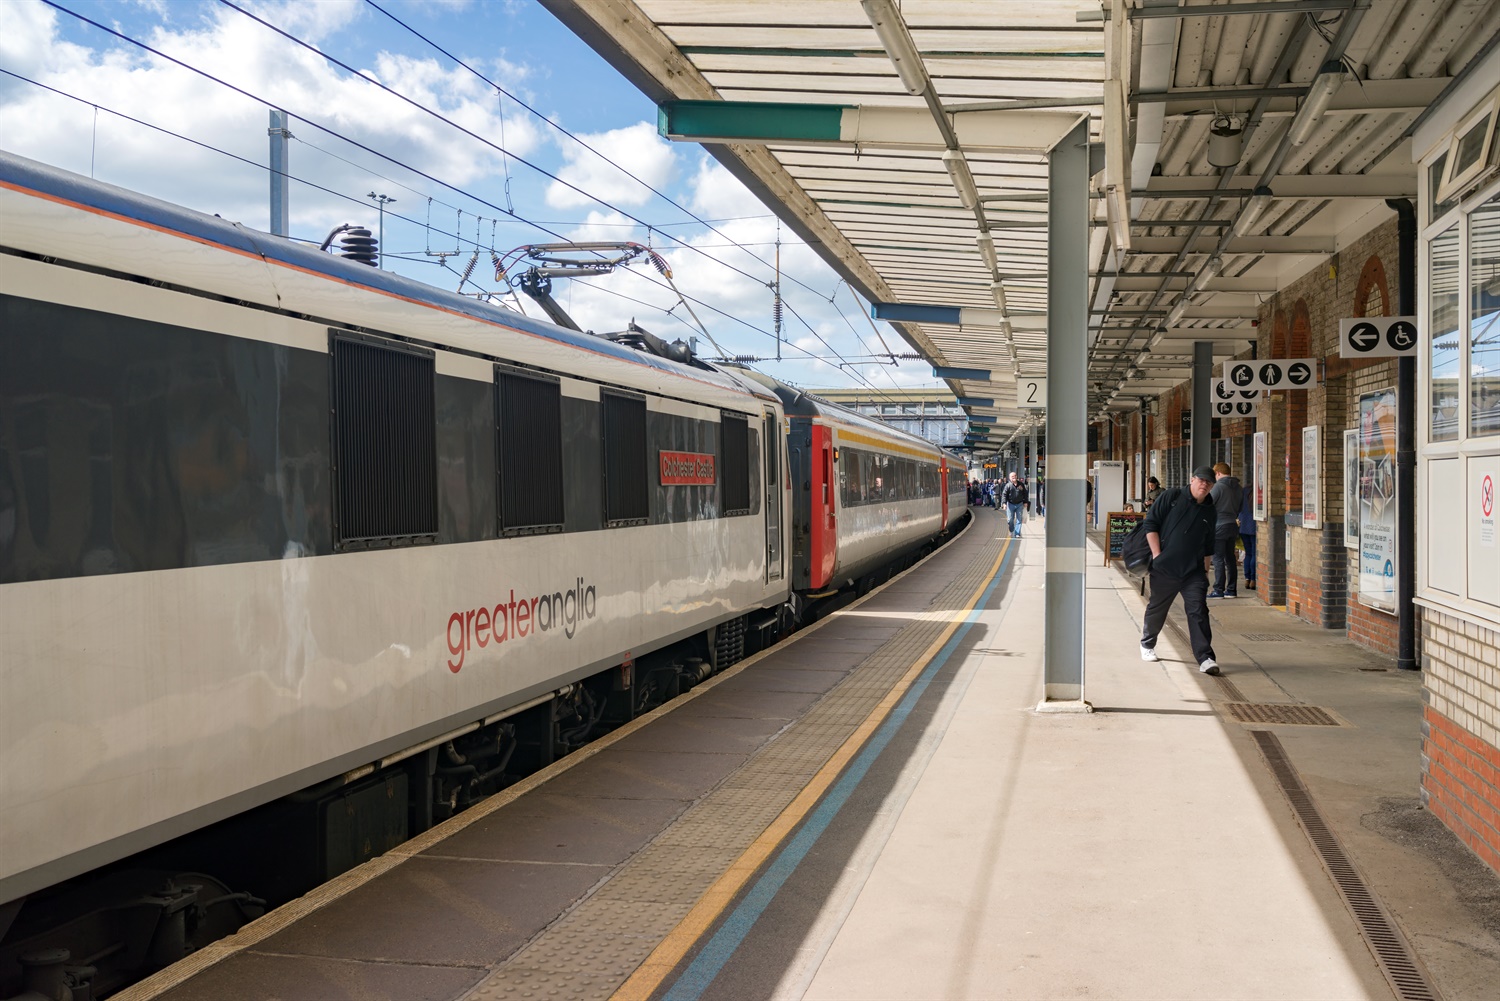 Greater Anglia employs extra Land Sheriffs to improve safety and security for passengers